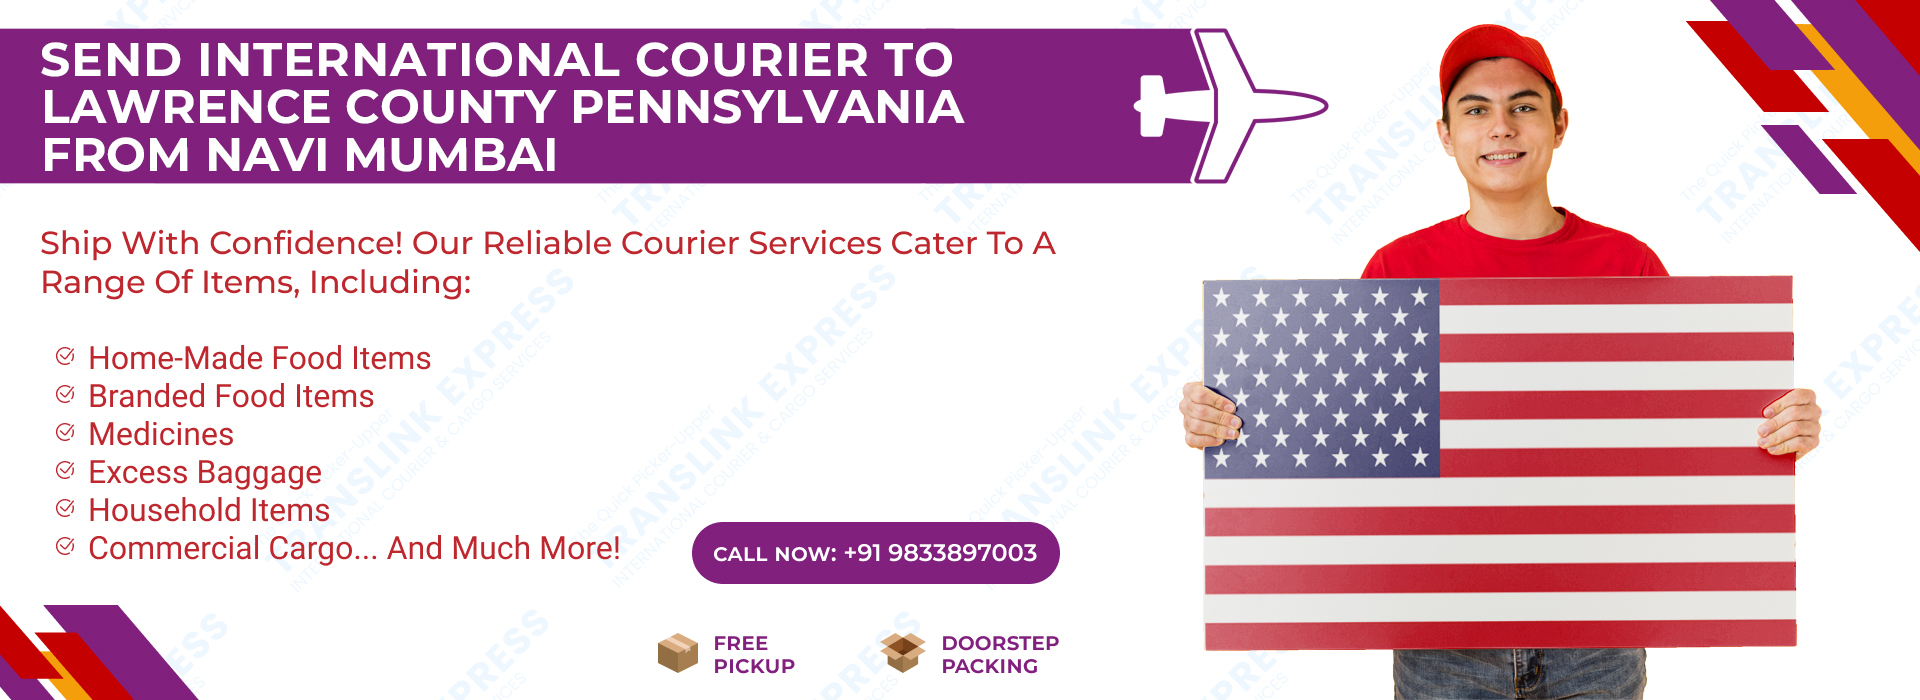 Courier to Lawrence County Pennsylvania From Navi Mumbai